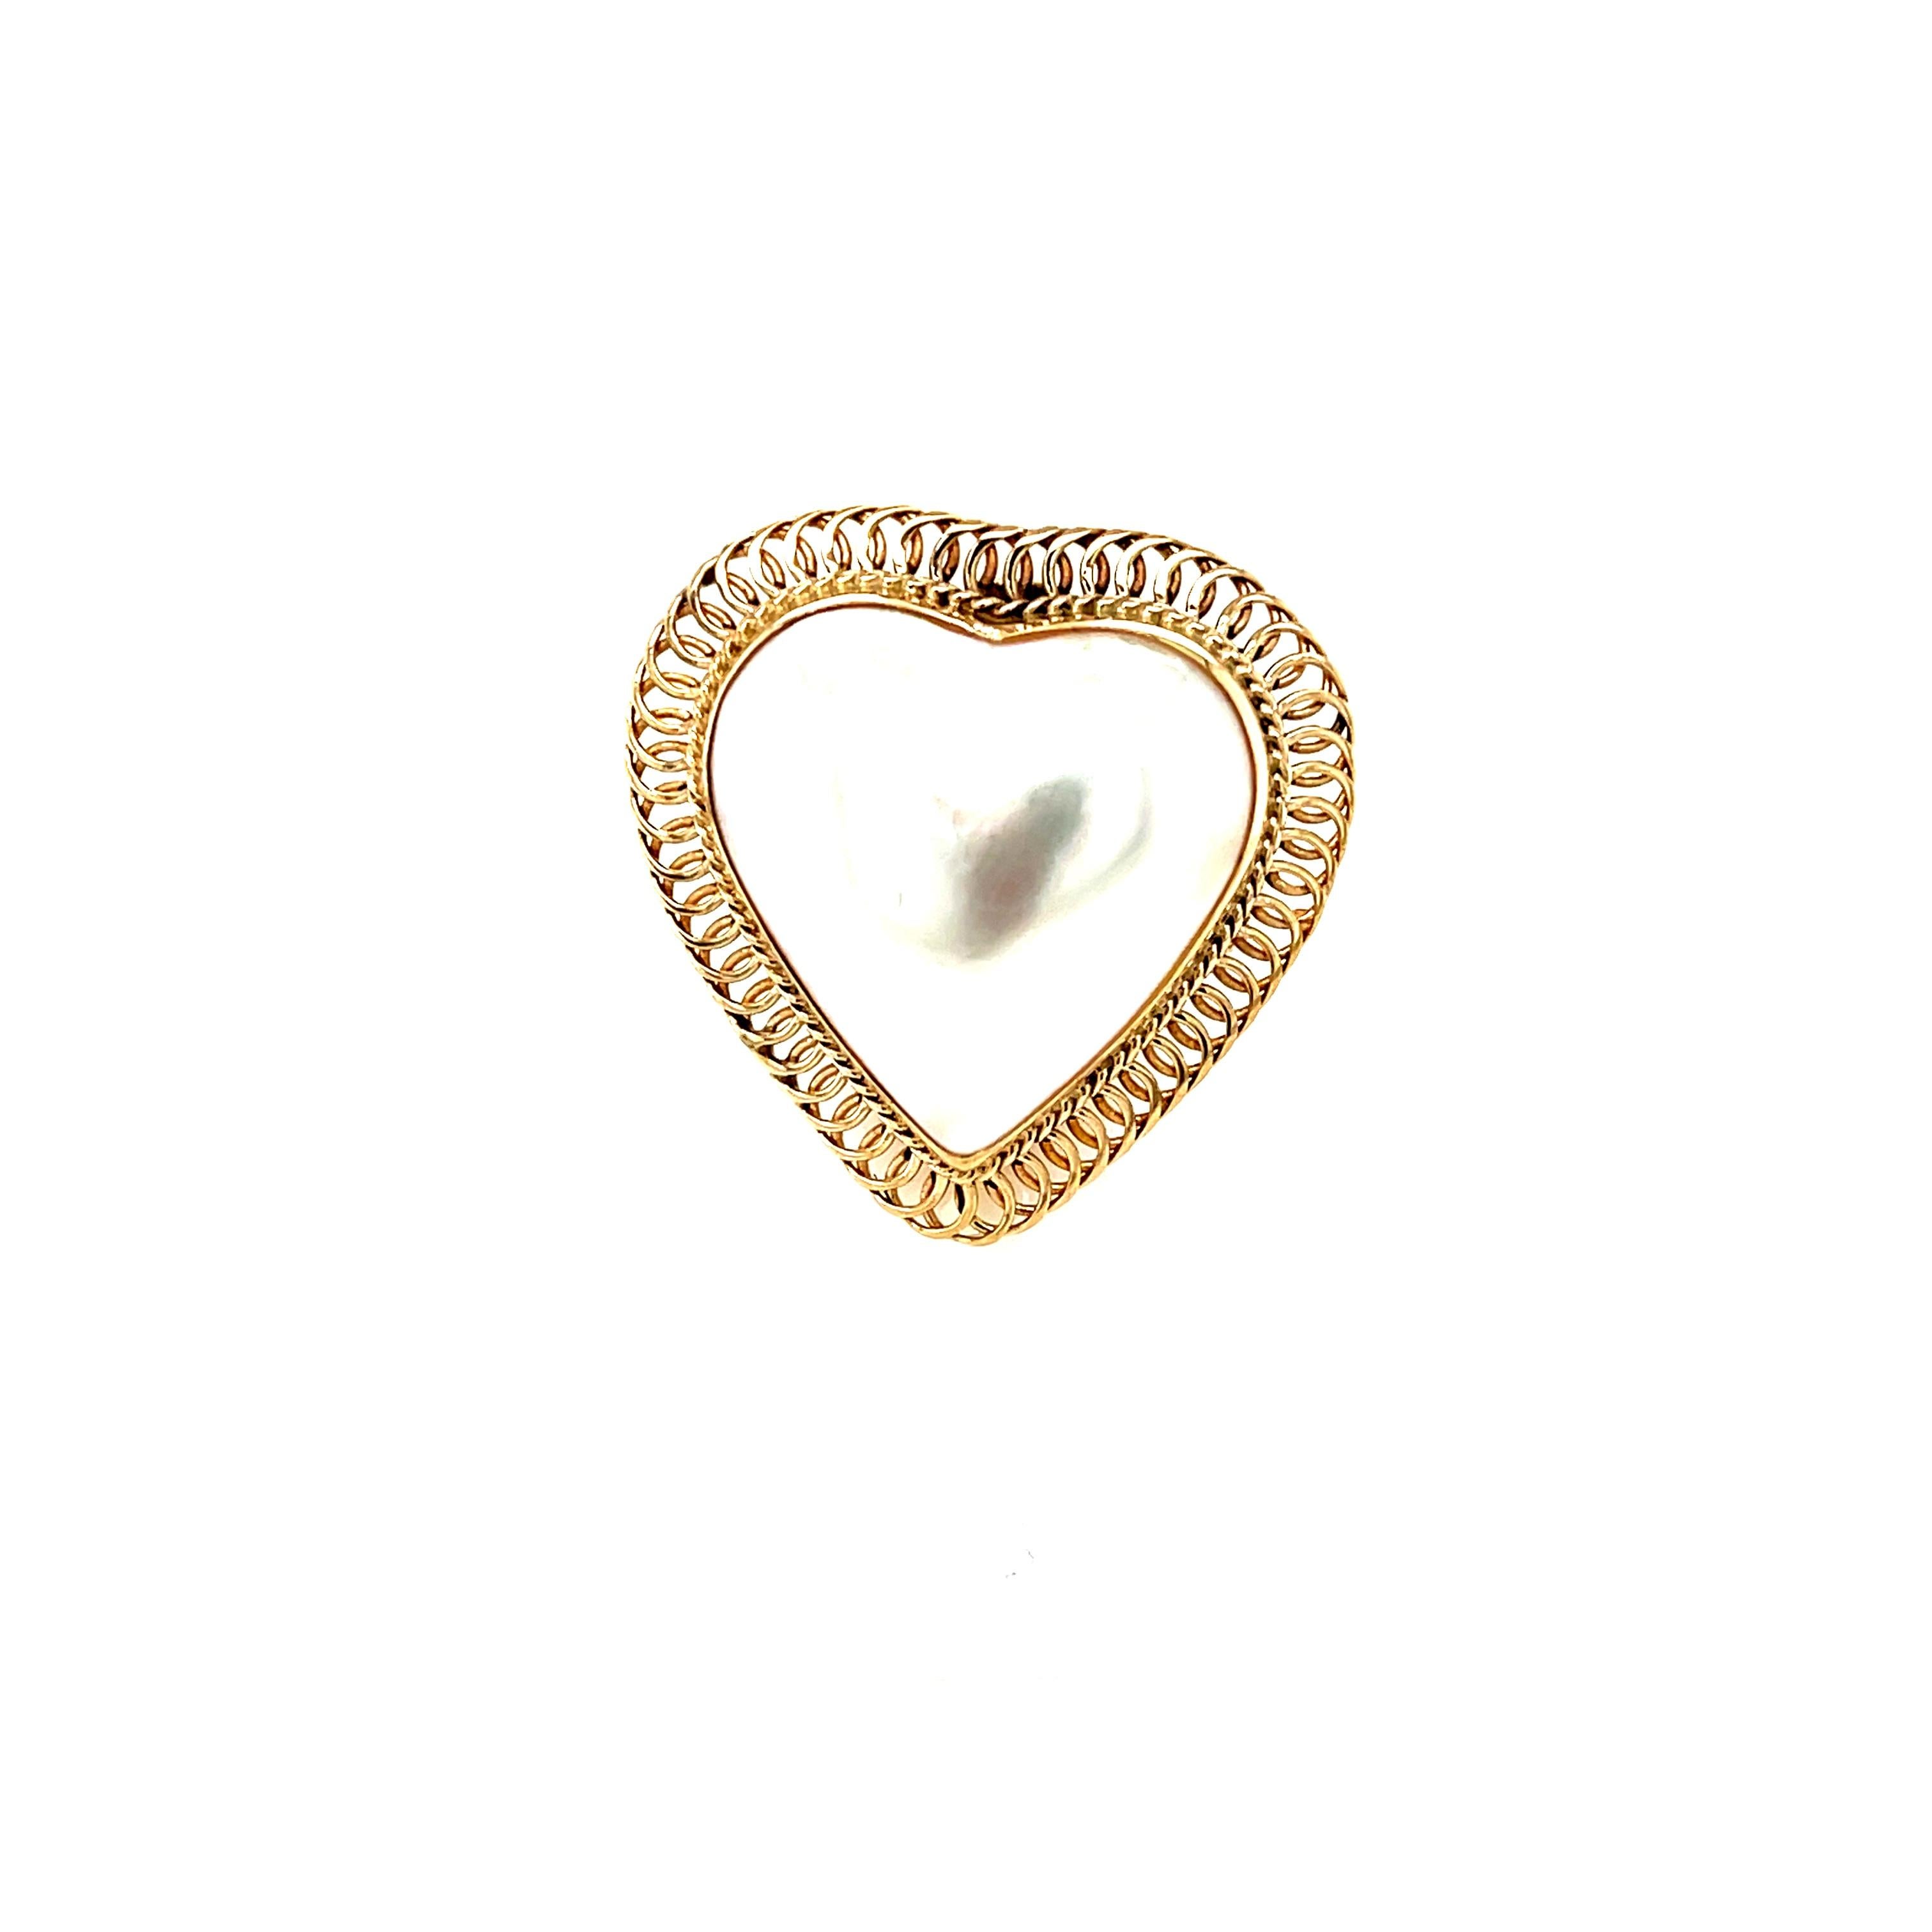 Heart Shaped Mabe Pearl Cocktail Ring with Yellow Gold Spiral Frame In New Condition For Sale In Los Angeles, CA